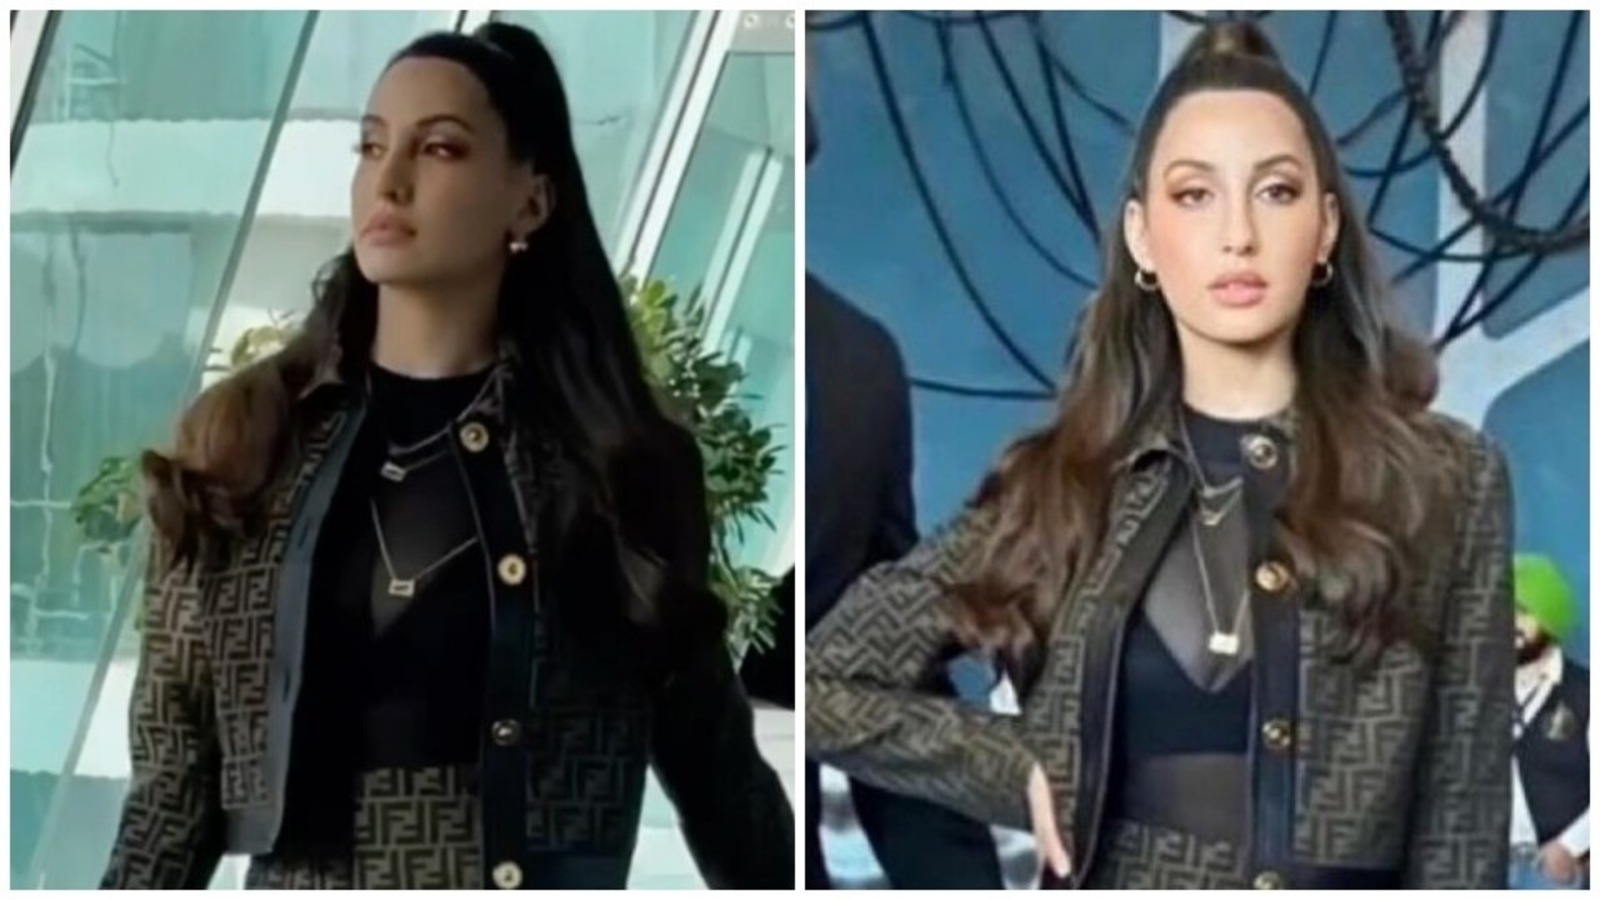 nora-fatehi-takes-over-abu-dhabi-during-iifa-awards-event-in-see-through-top-and-mini-skirt-set-see-pics-video